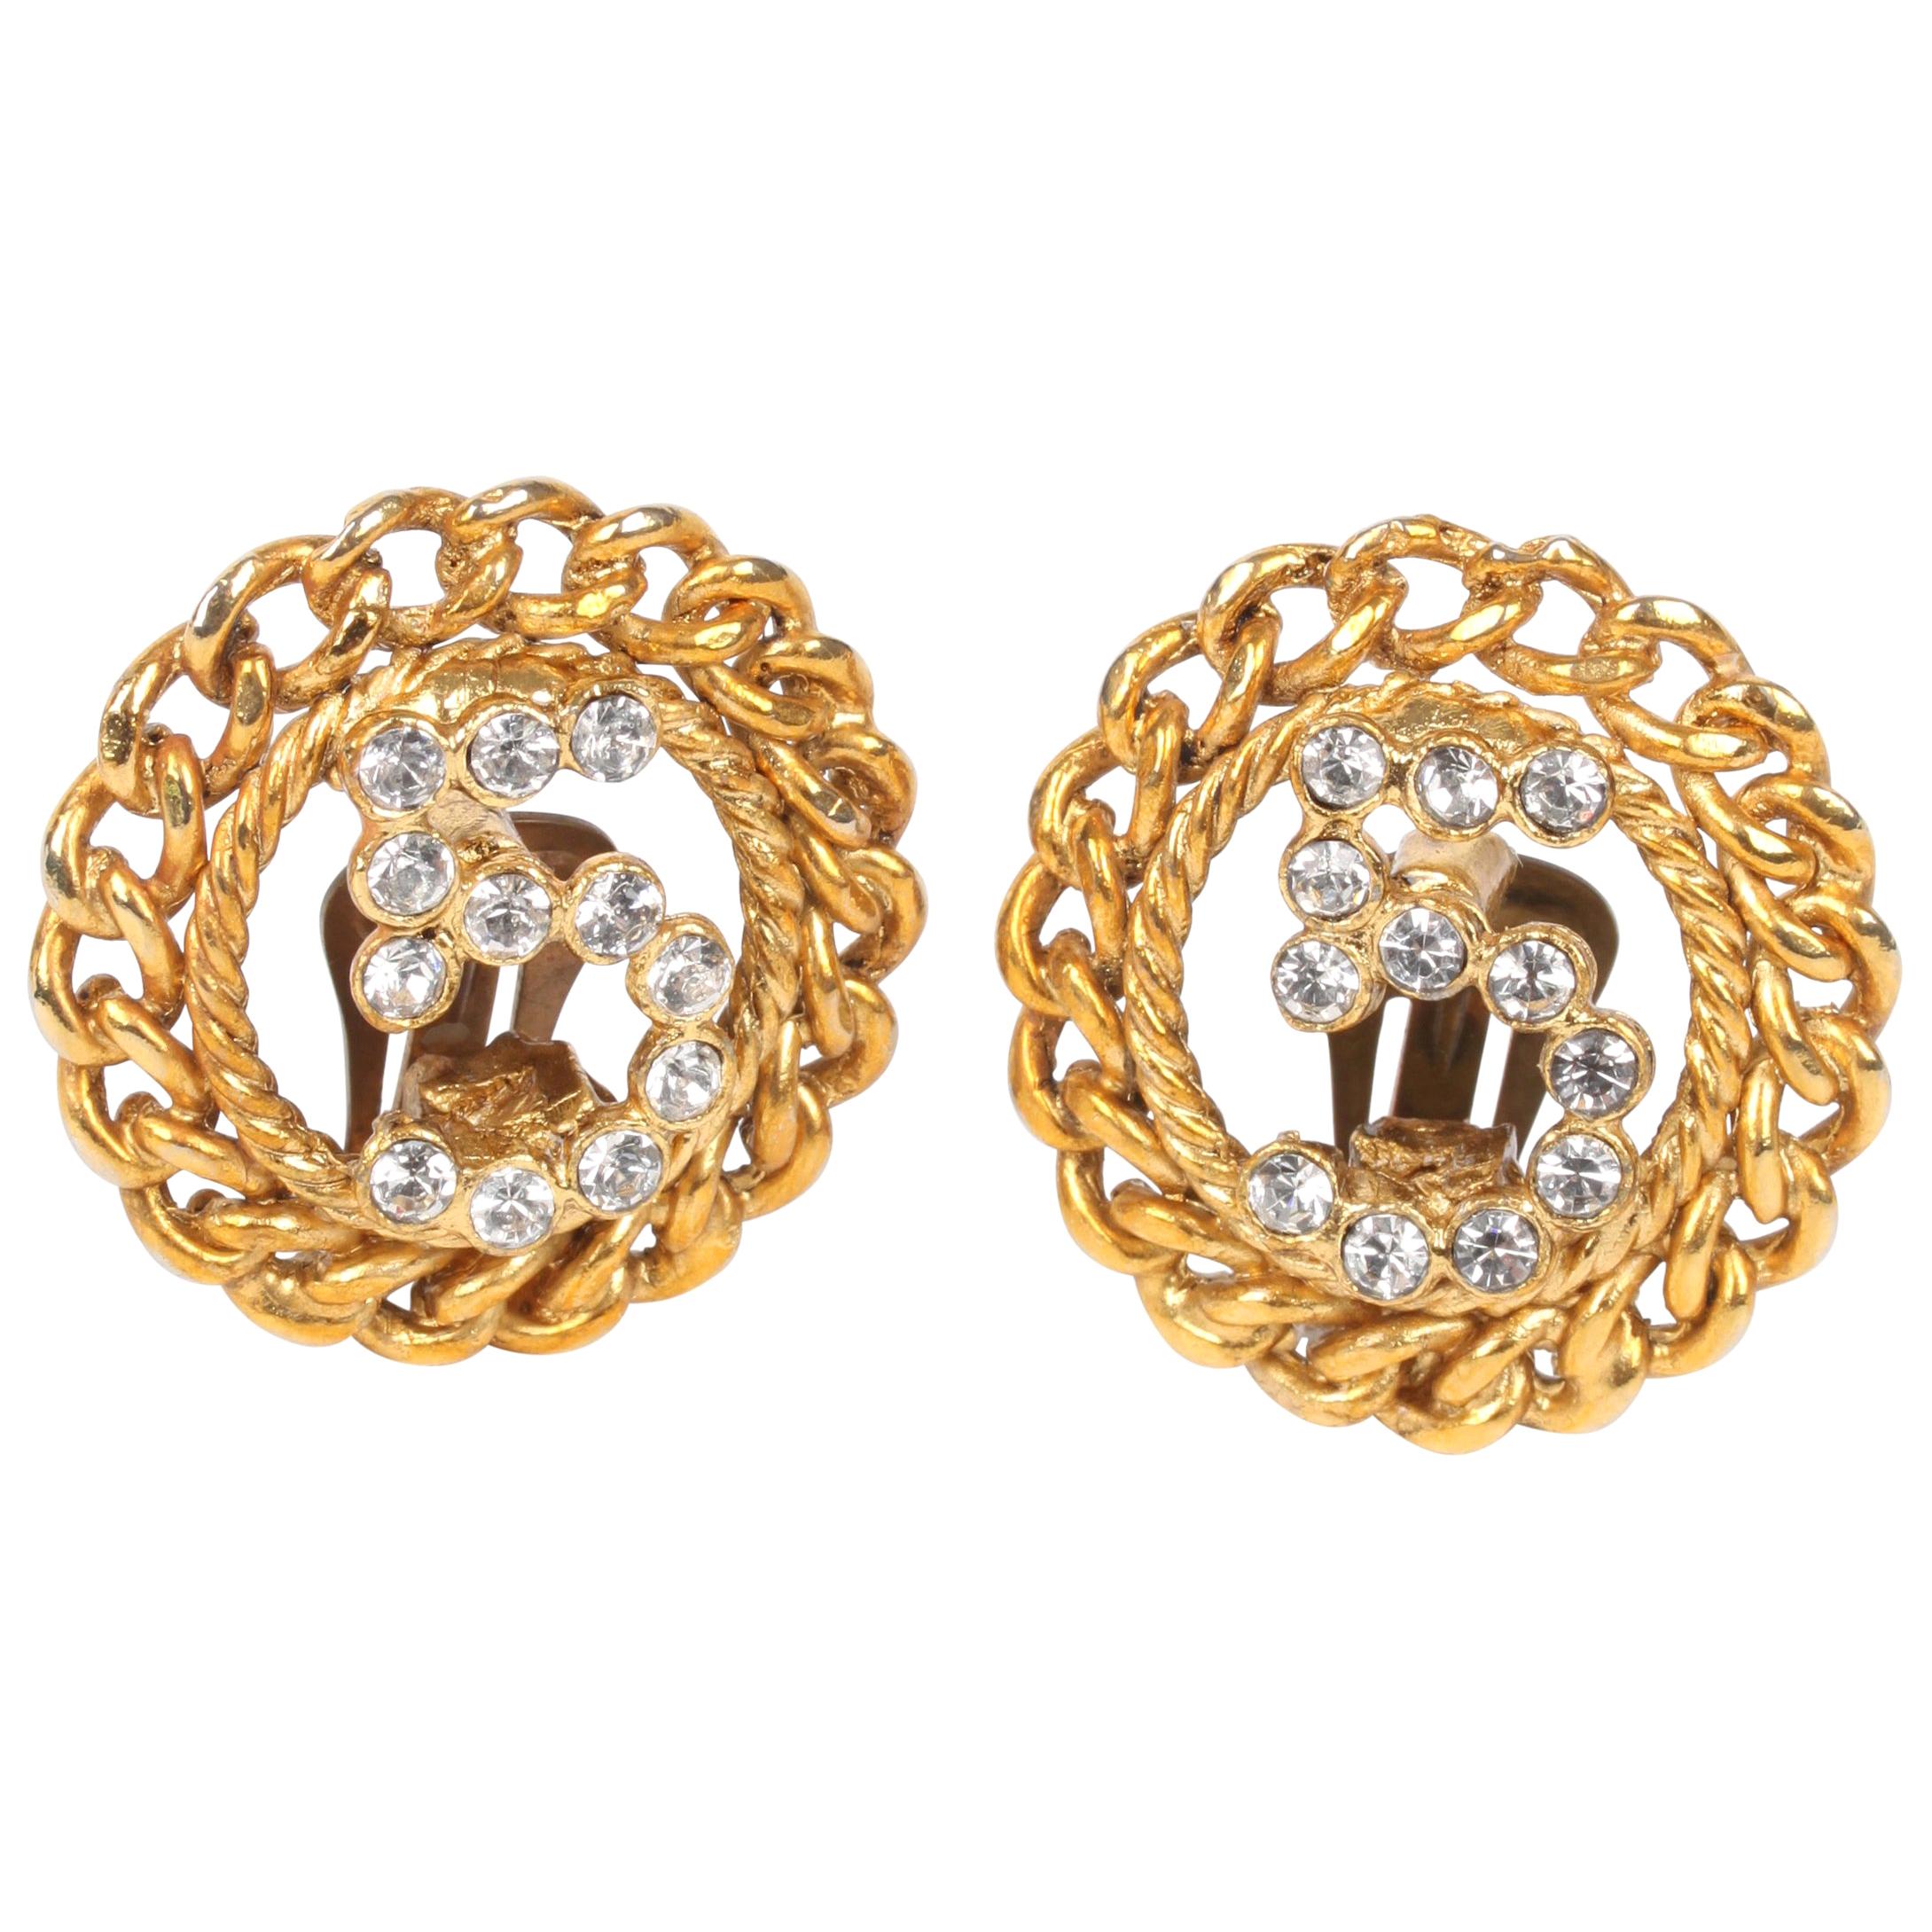 Chanel No. 5 Earrings - gold For Sale